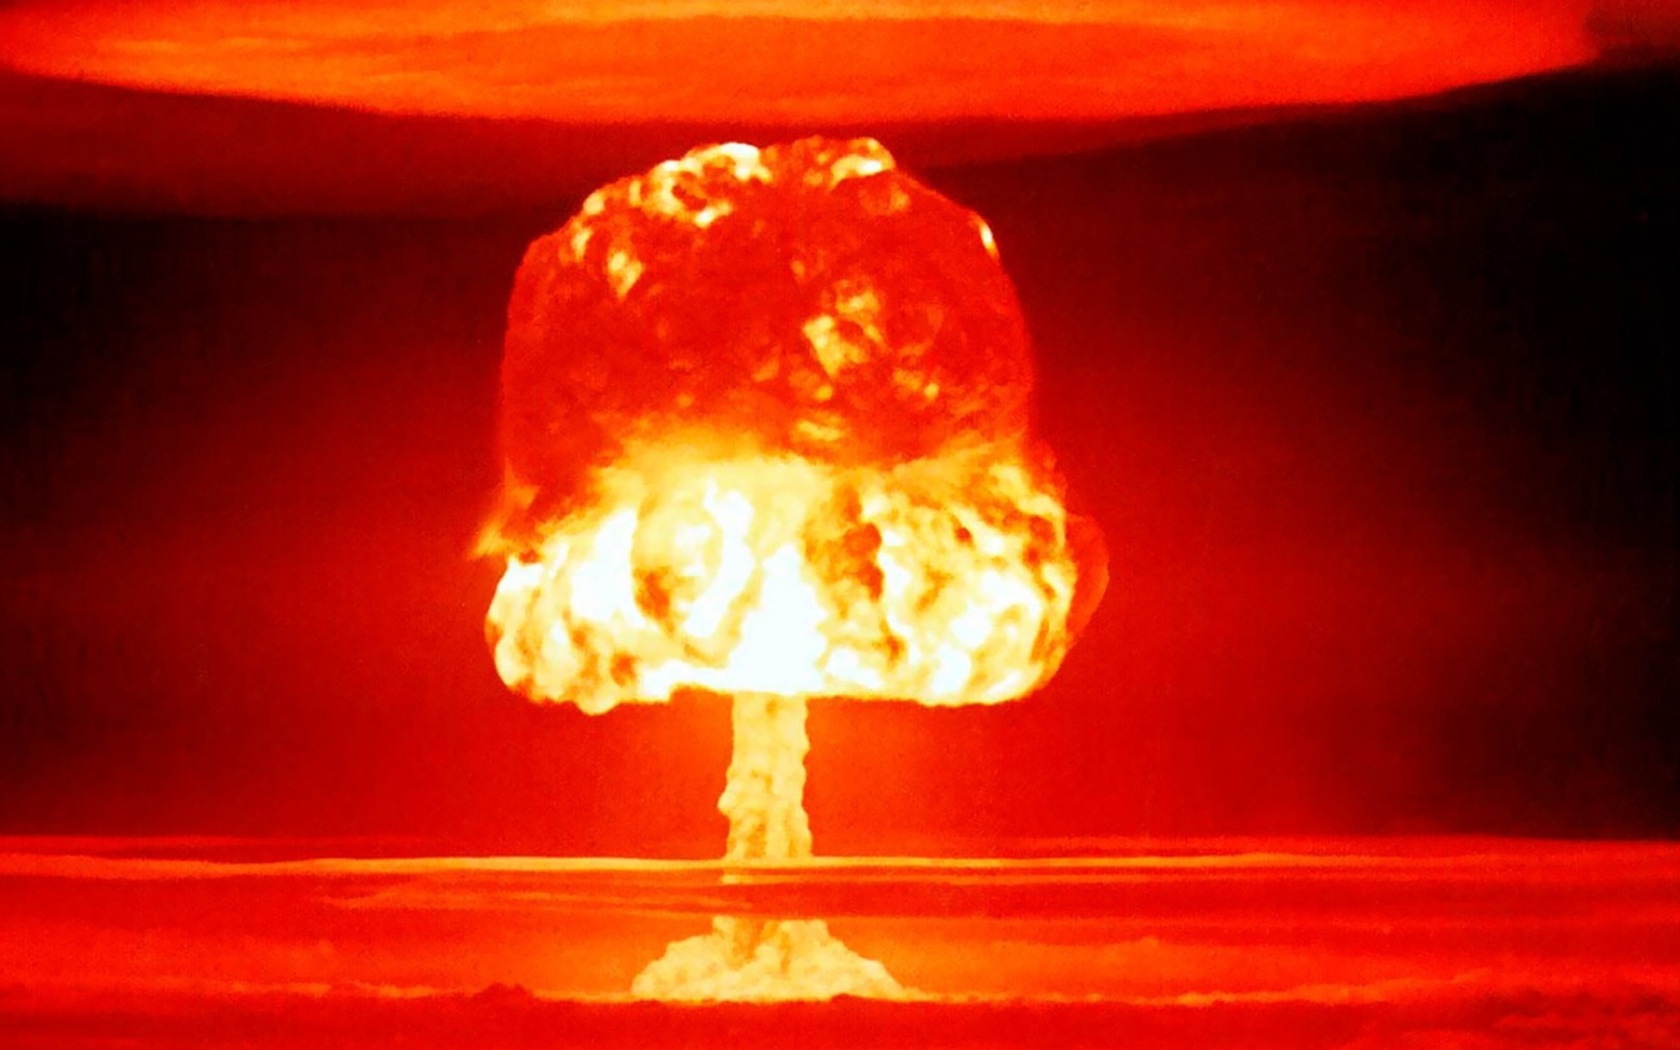 Nuclear explosion wallpaper 1680x1050